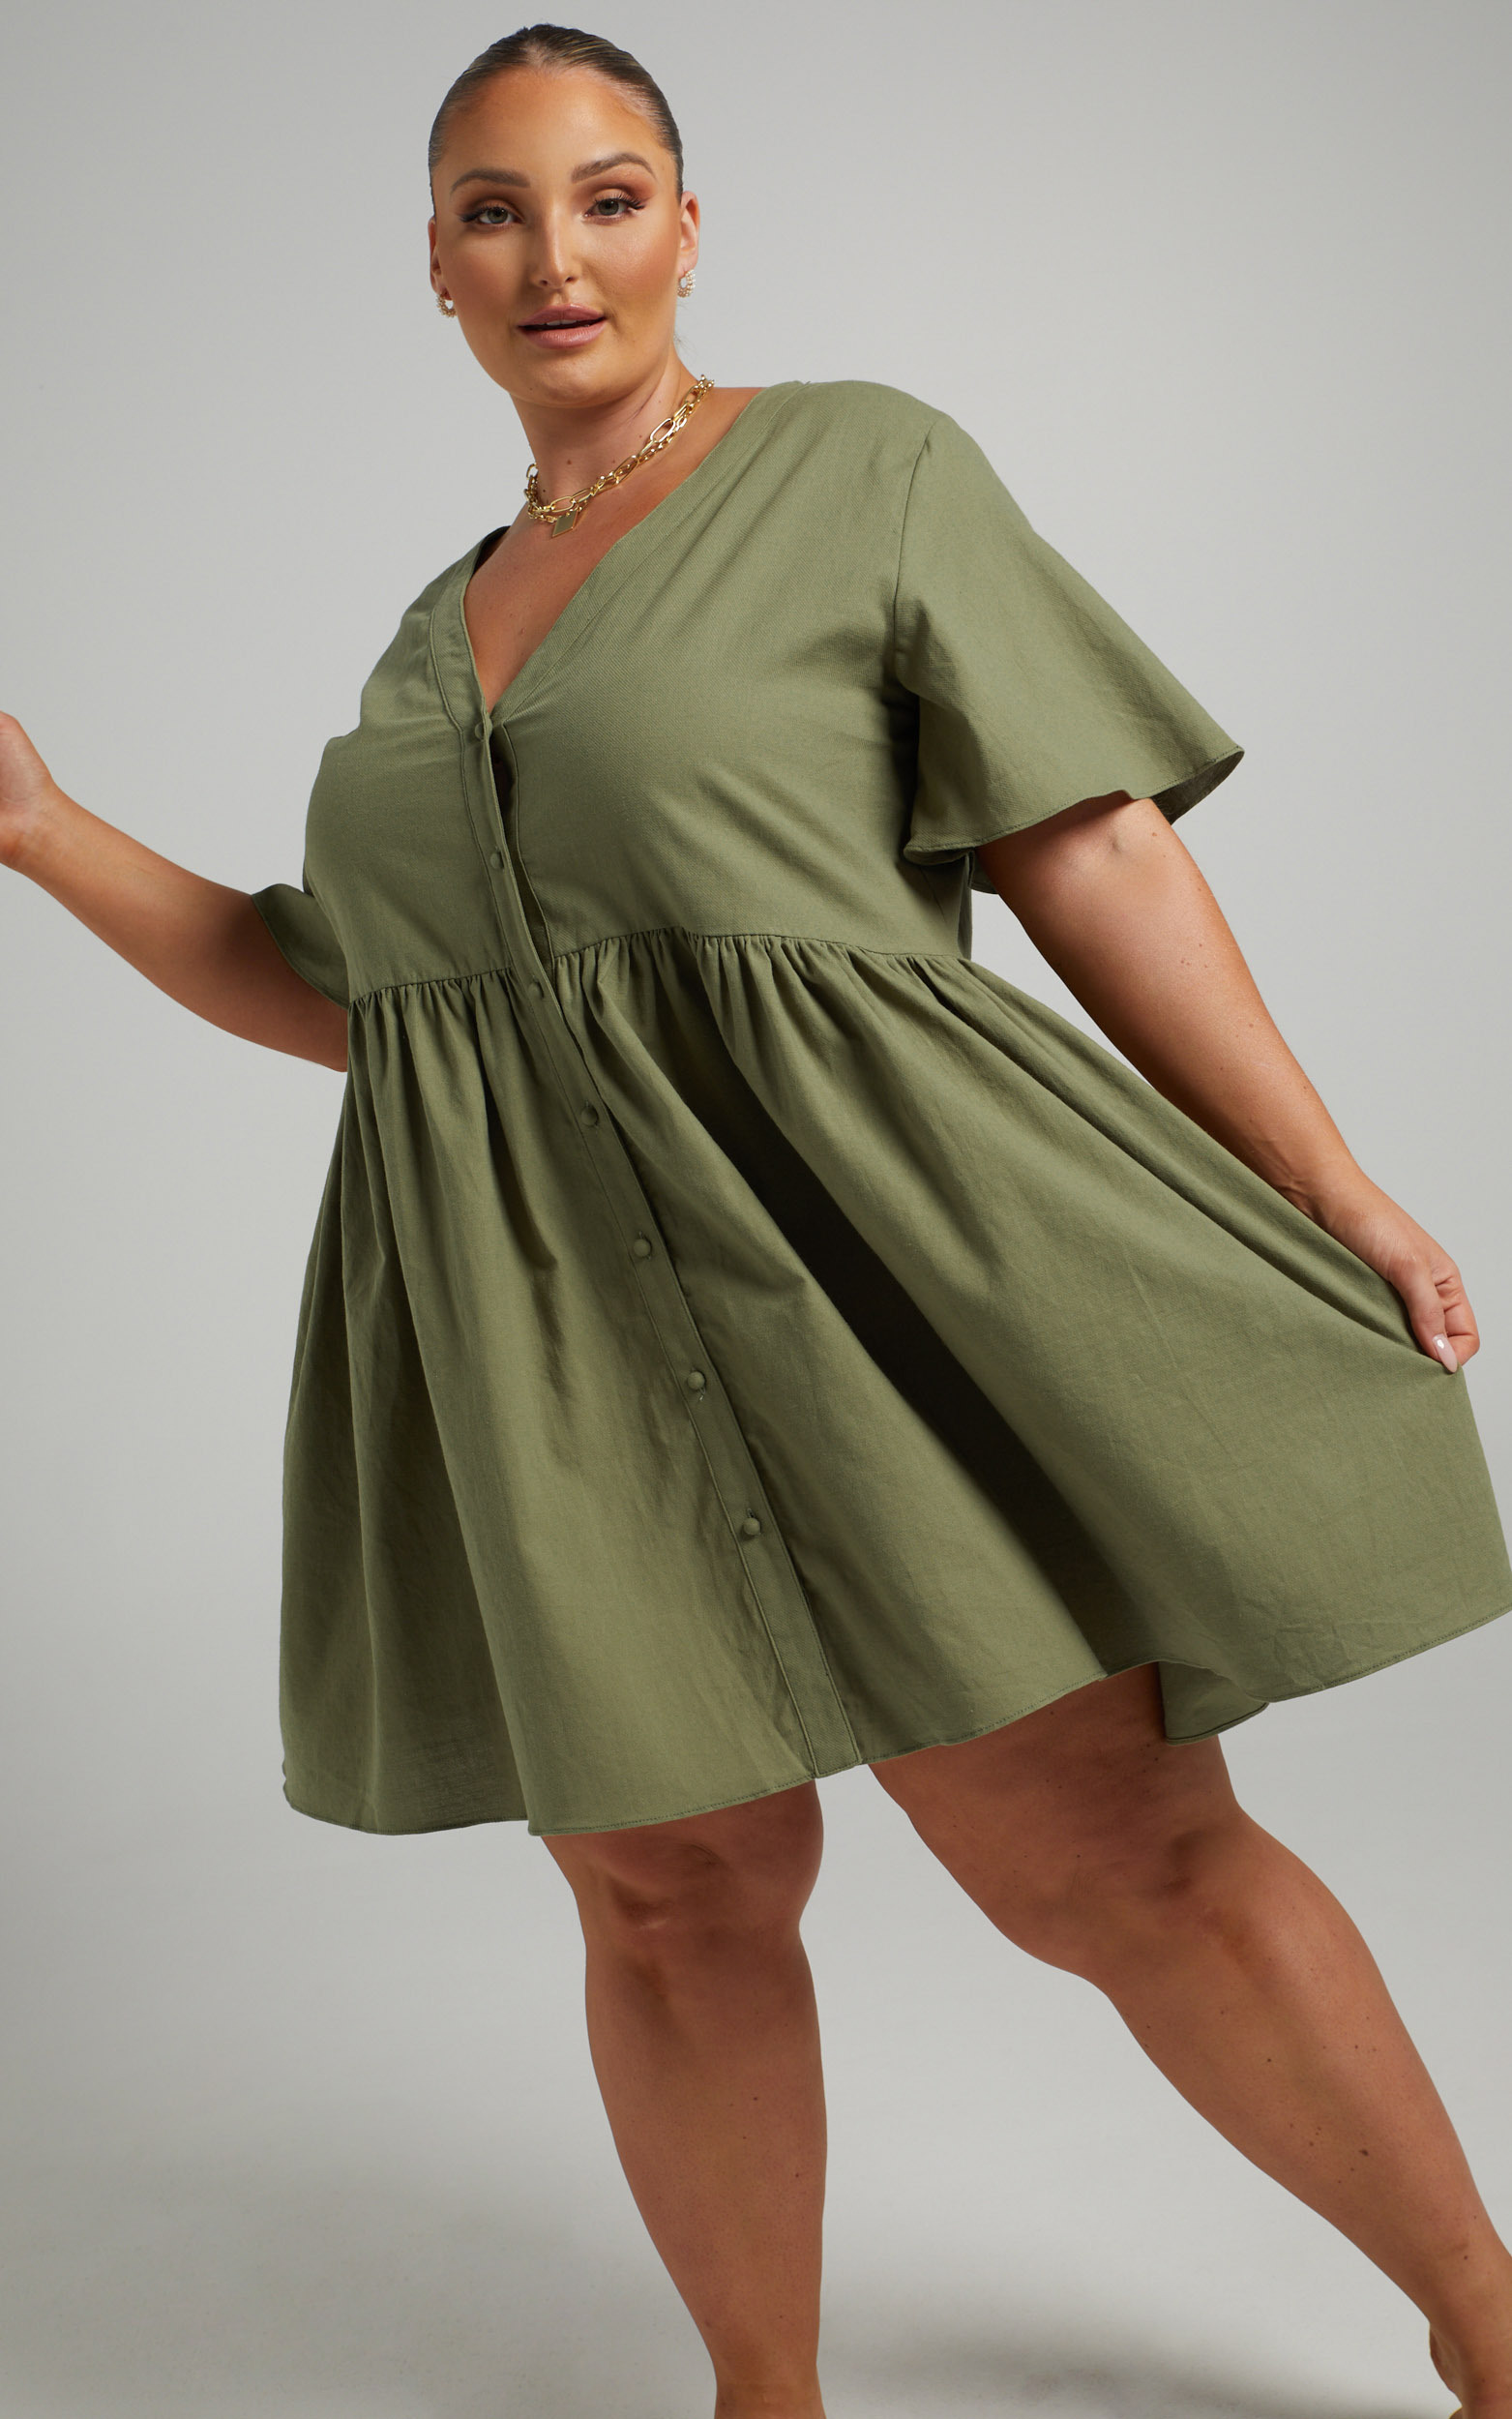 Staycation Smock Button Up Mini Dress in Khaki - 04, GRN2, hi-res image number null